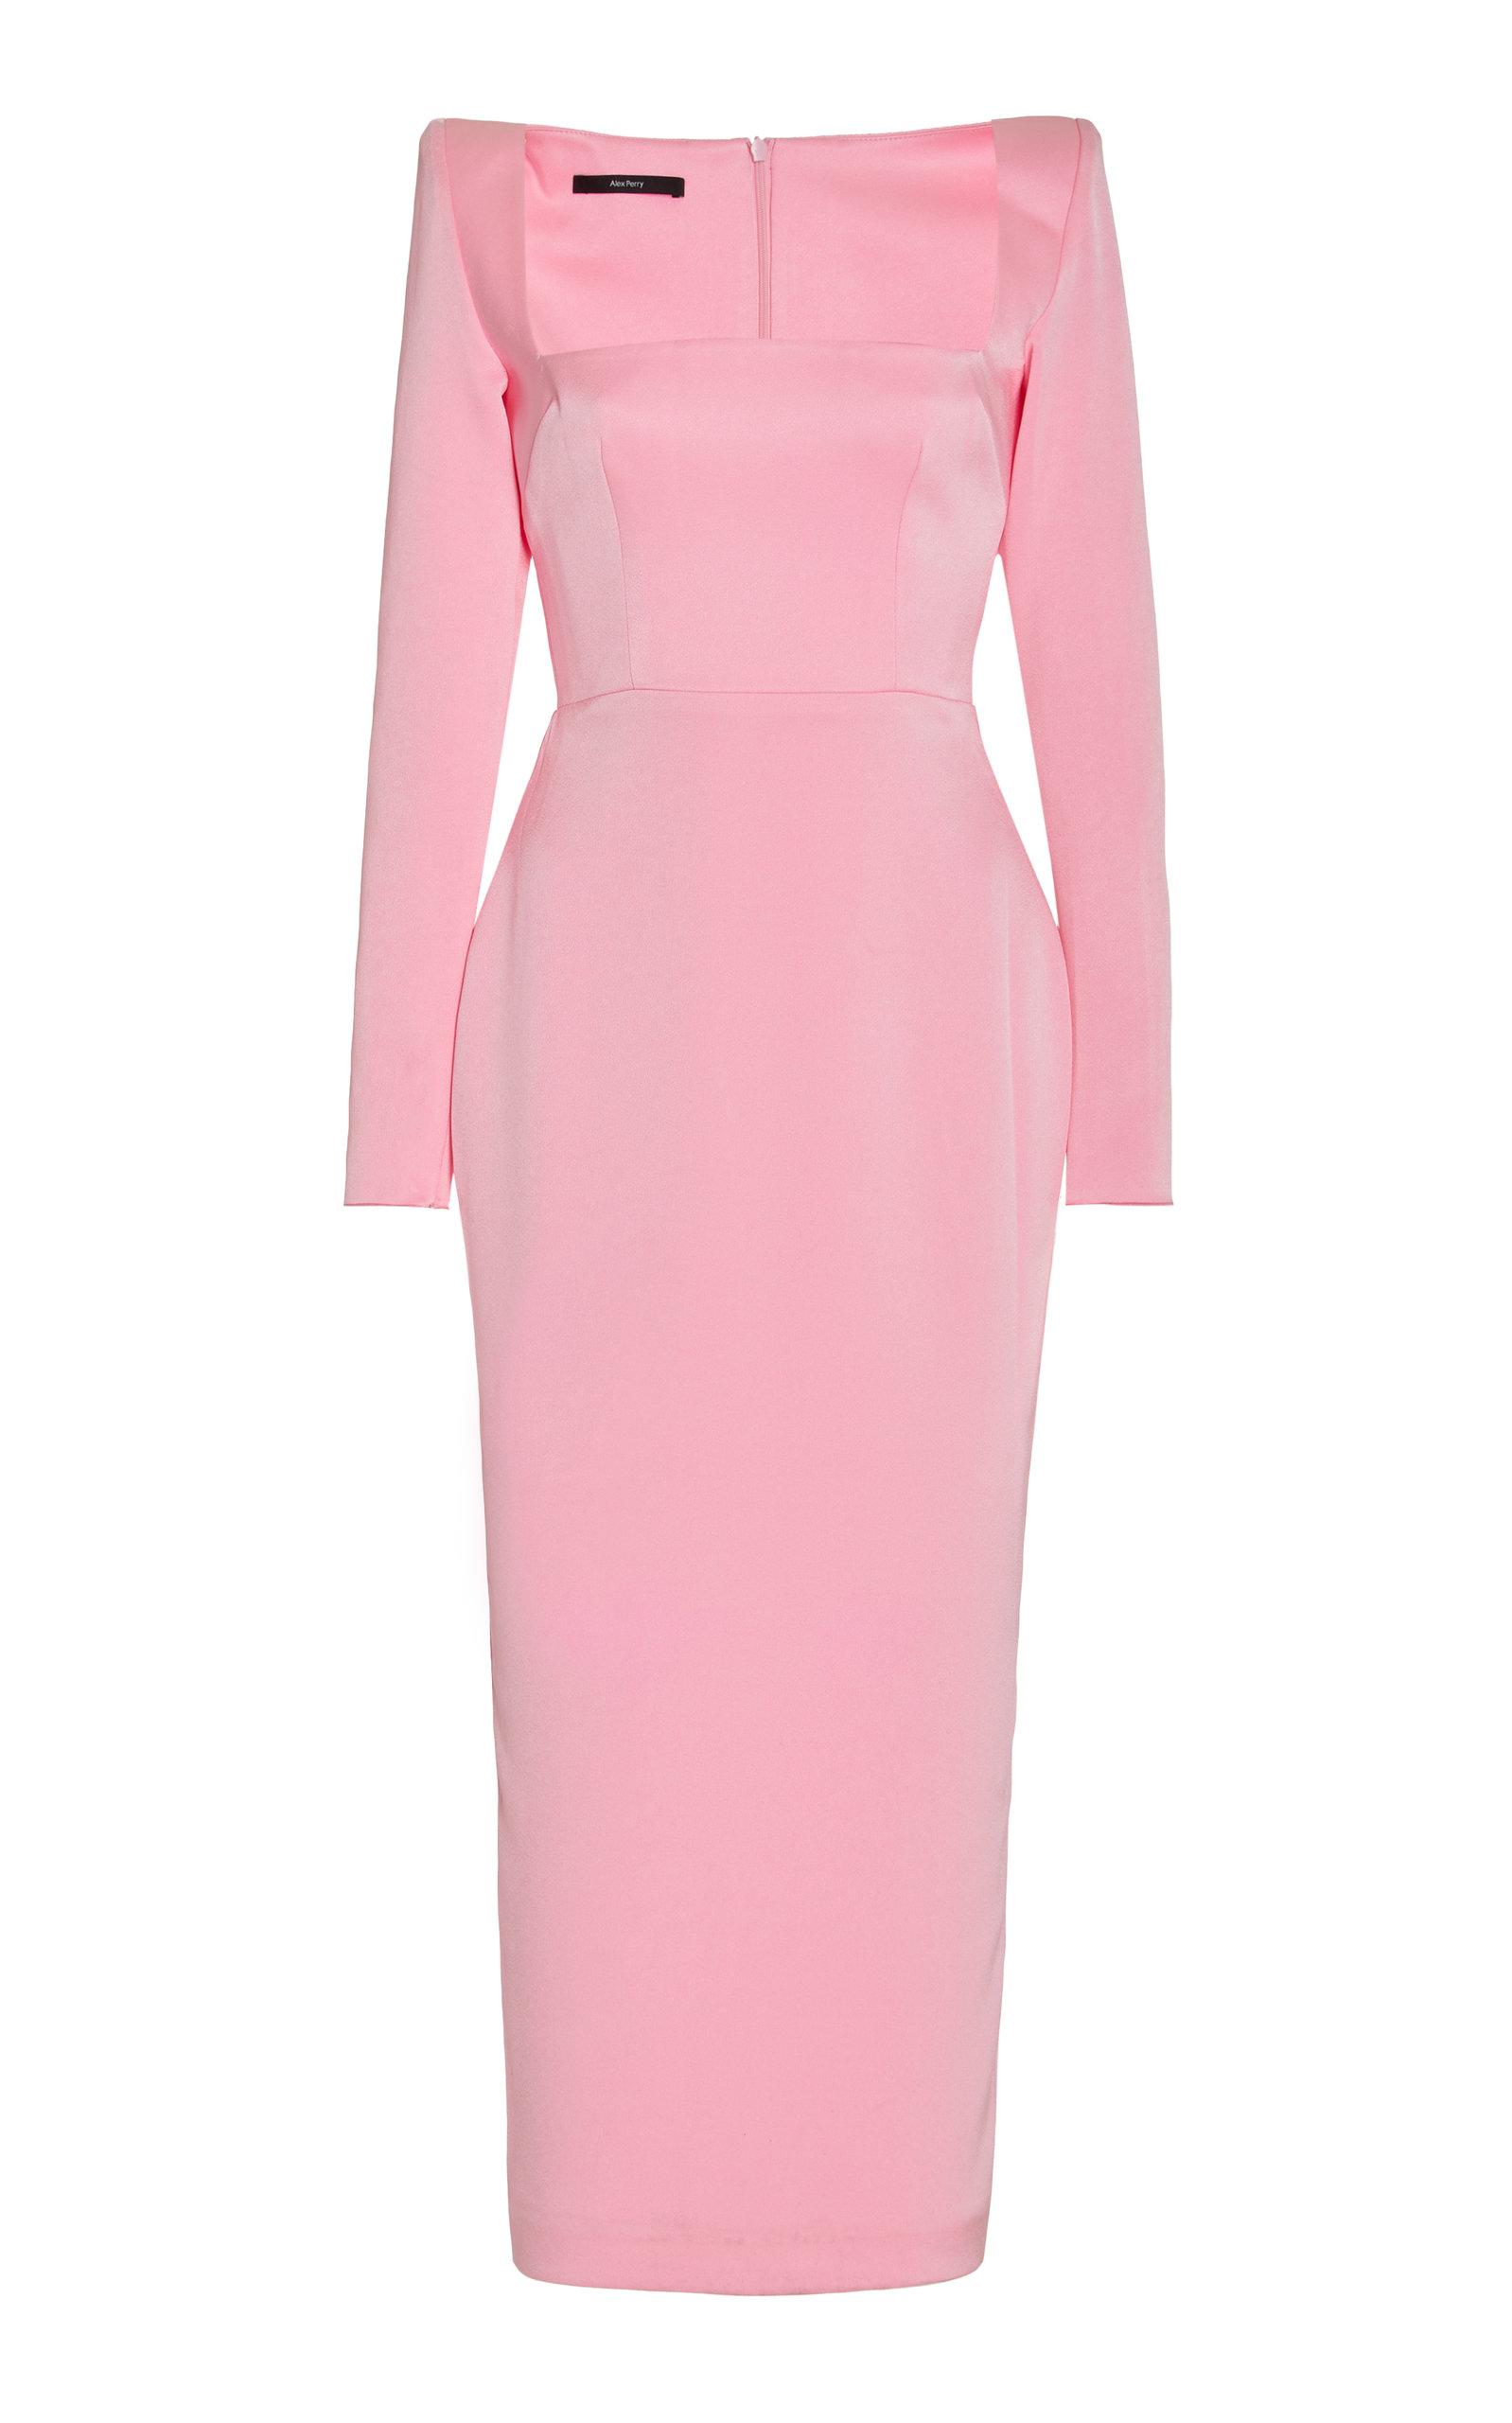 Alex Perry Mercer Satin Crepe Dress in Pink | Lyst